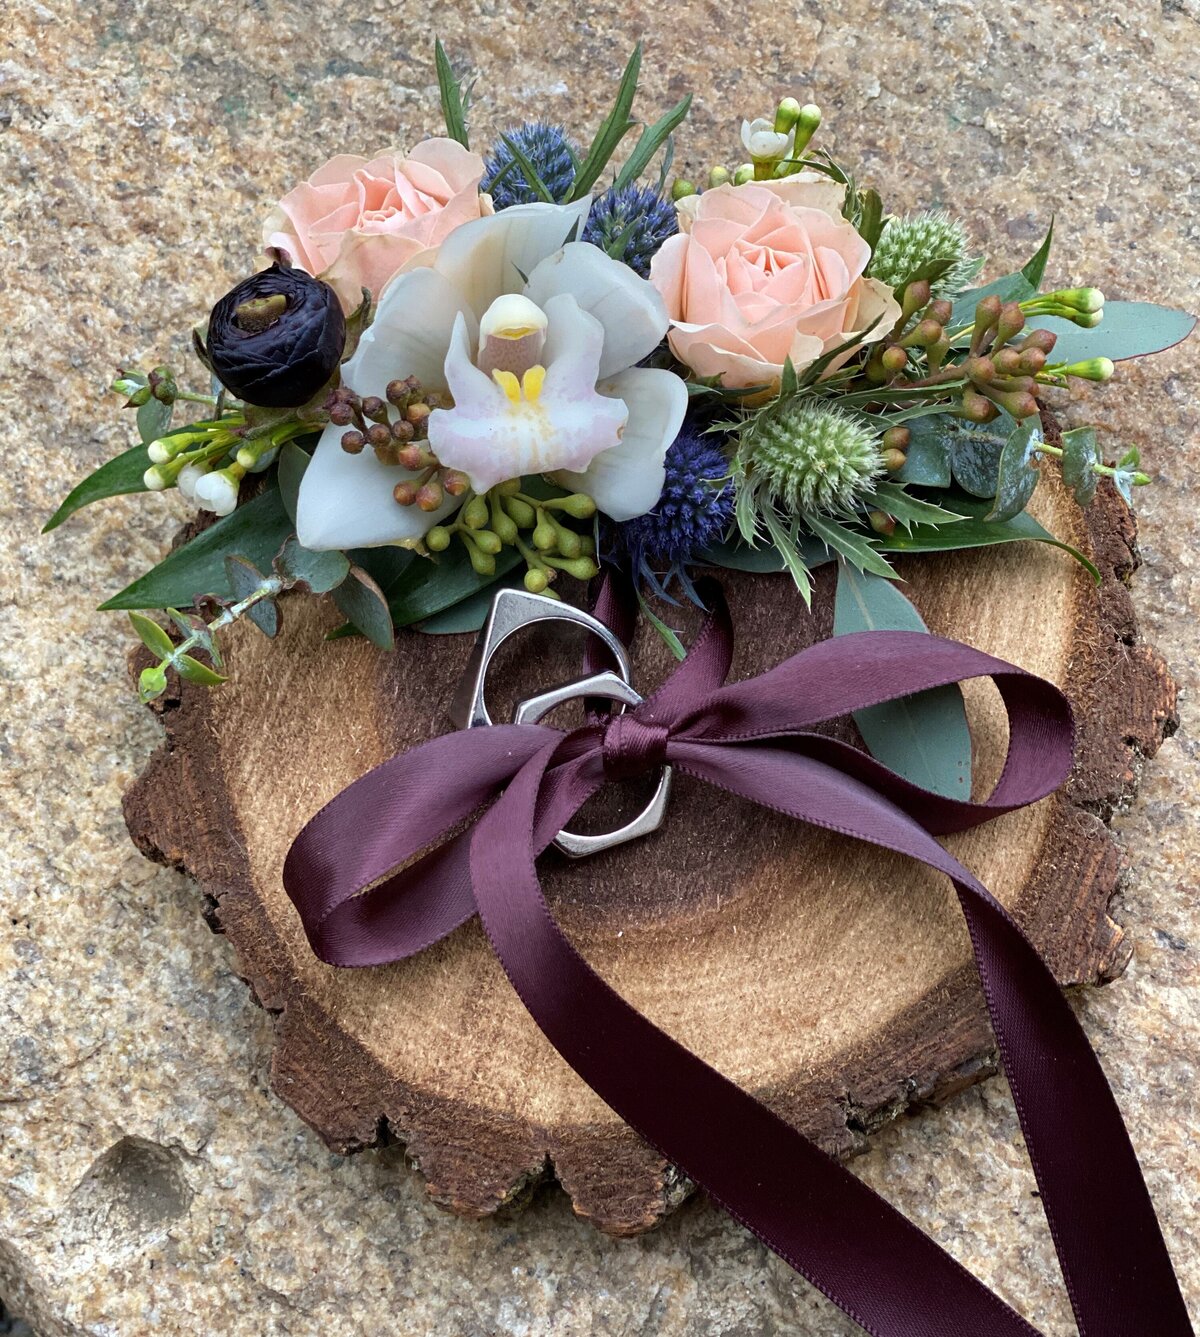 BKC4U WEDDING FLOWERS RING BEARER WOODEN DISK WITH FLOWERS